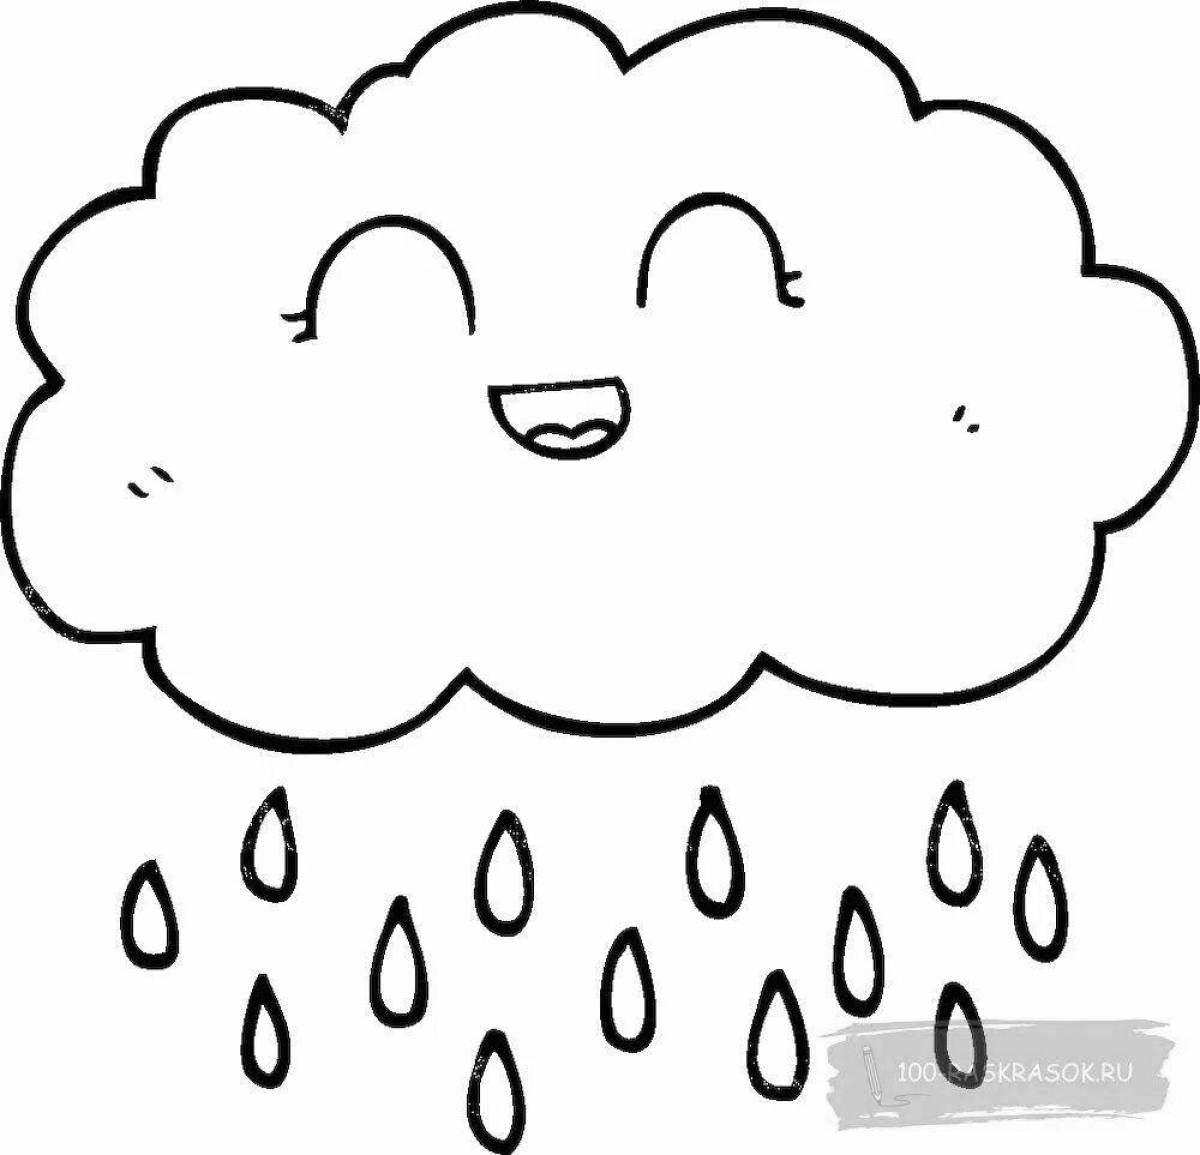 Playful rain coloring page for kids